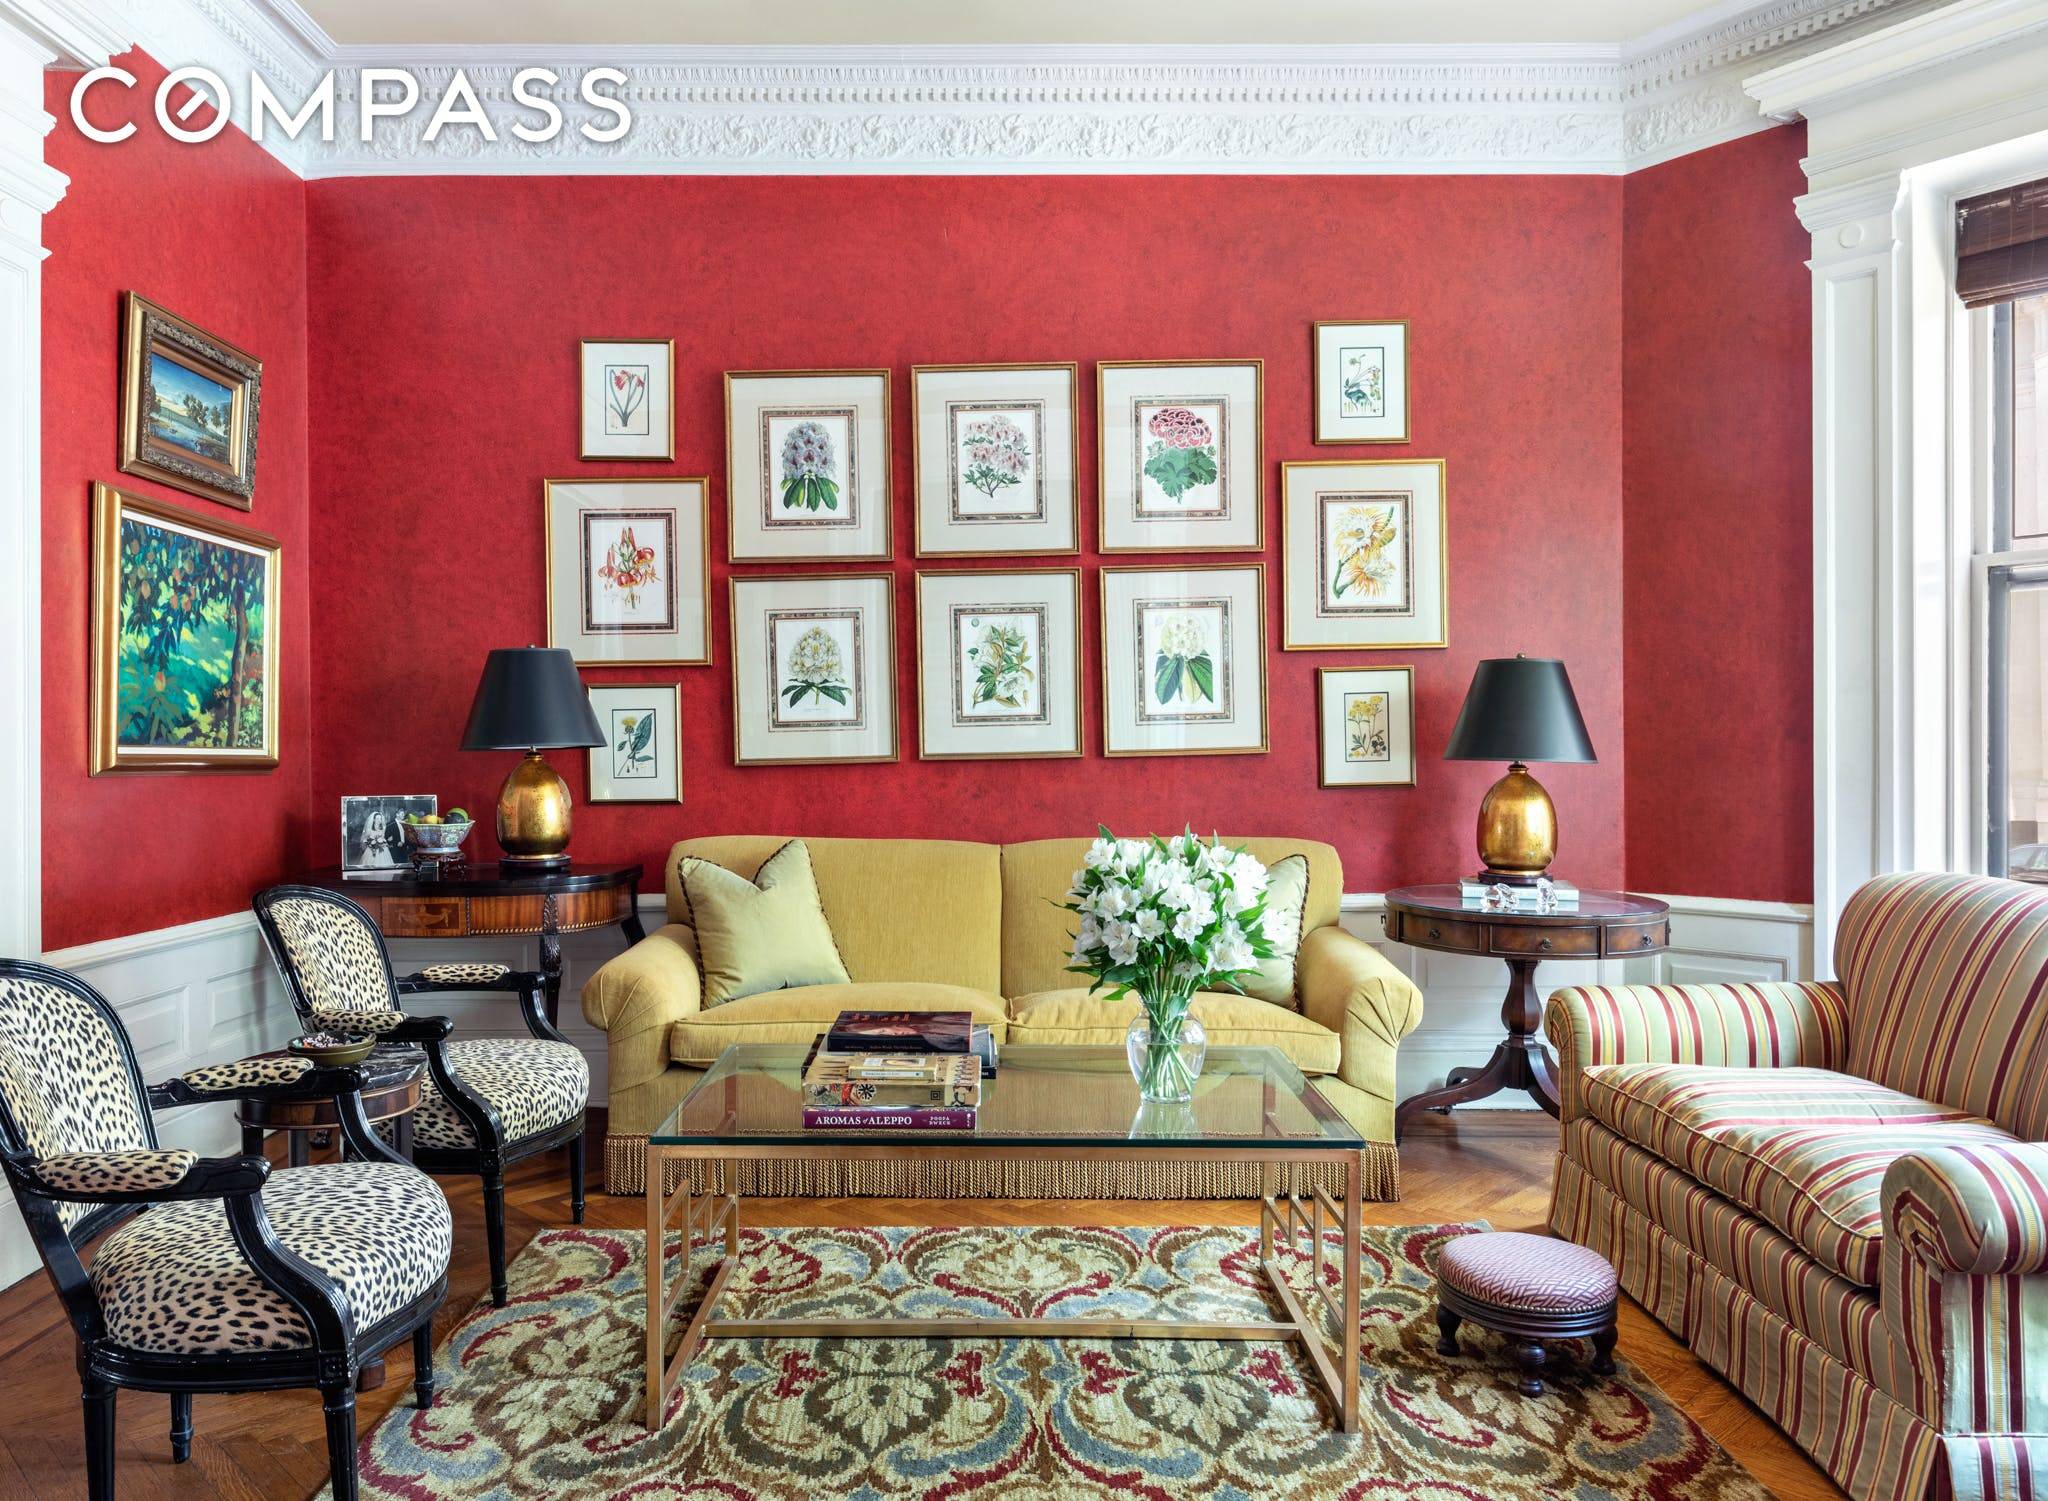 A combination of opulent and cozy, 280 Garfield represents the best of Park Slope townhouse living.